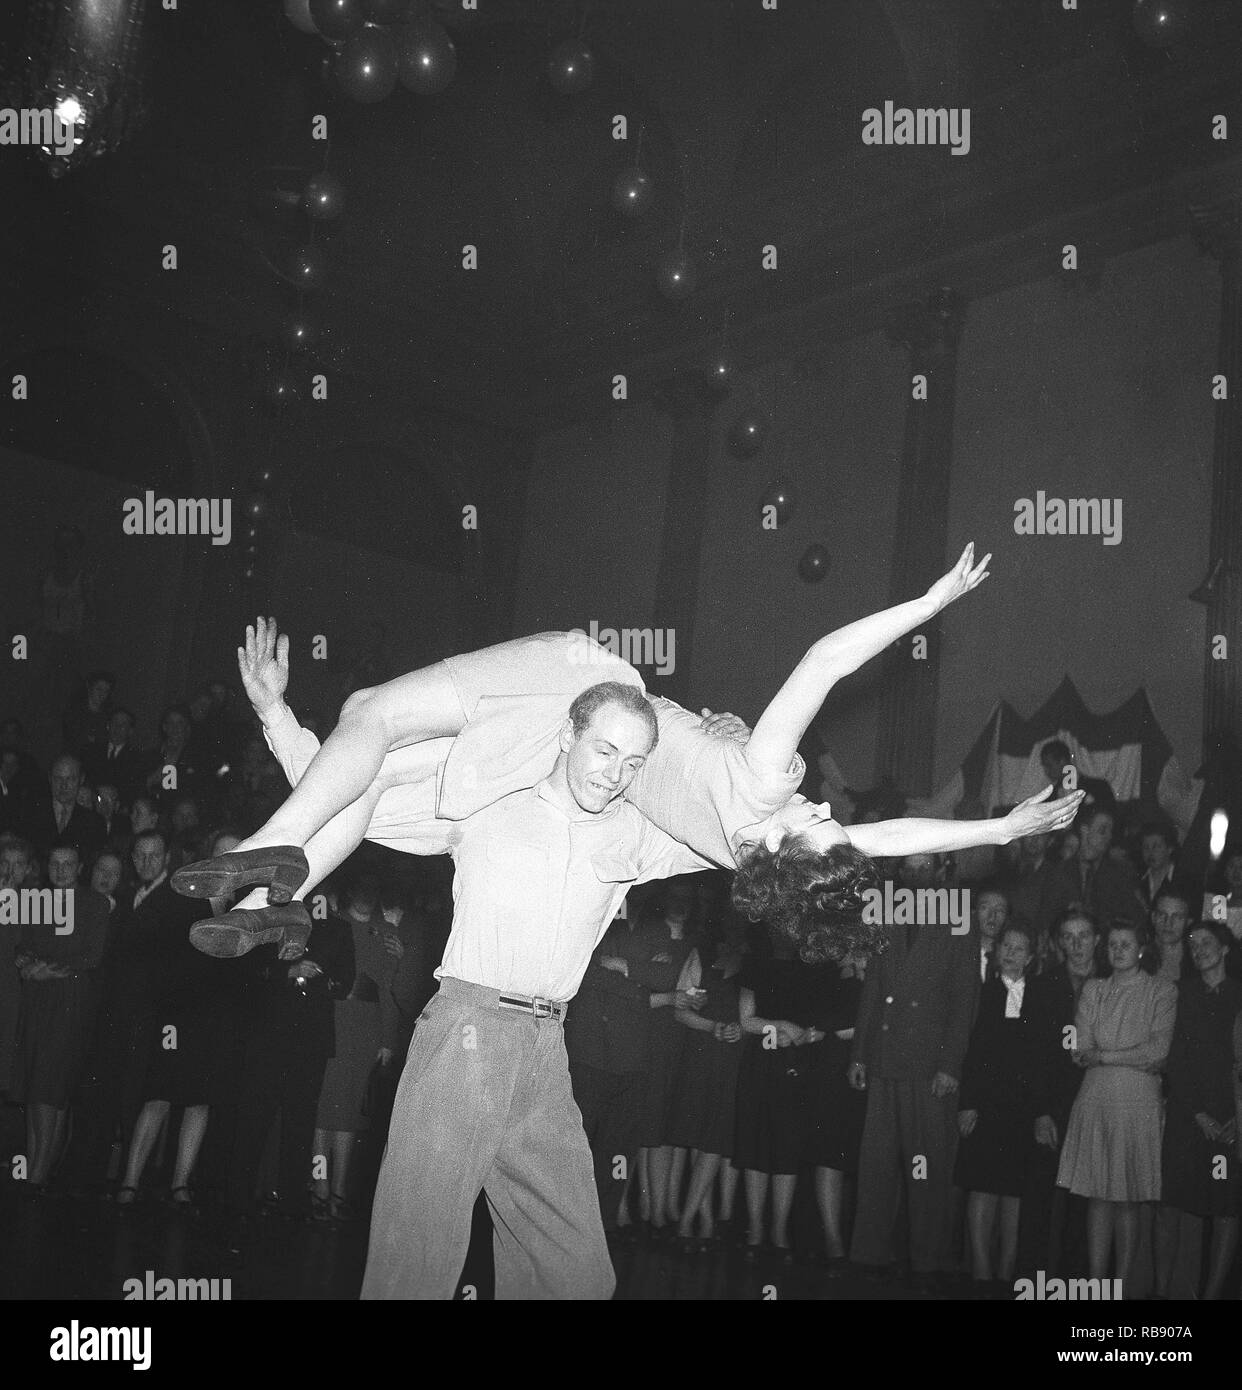 Jitterbug dance. A dance popularized in the United states and spread by American soldiers and sailors around the world during the Second world war. Pictured here a young couple when dancing the Jitterbug dance 1948 during a competition dance event. Photo: Kristoffersson ref AH21-3 Stock Photo